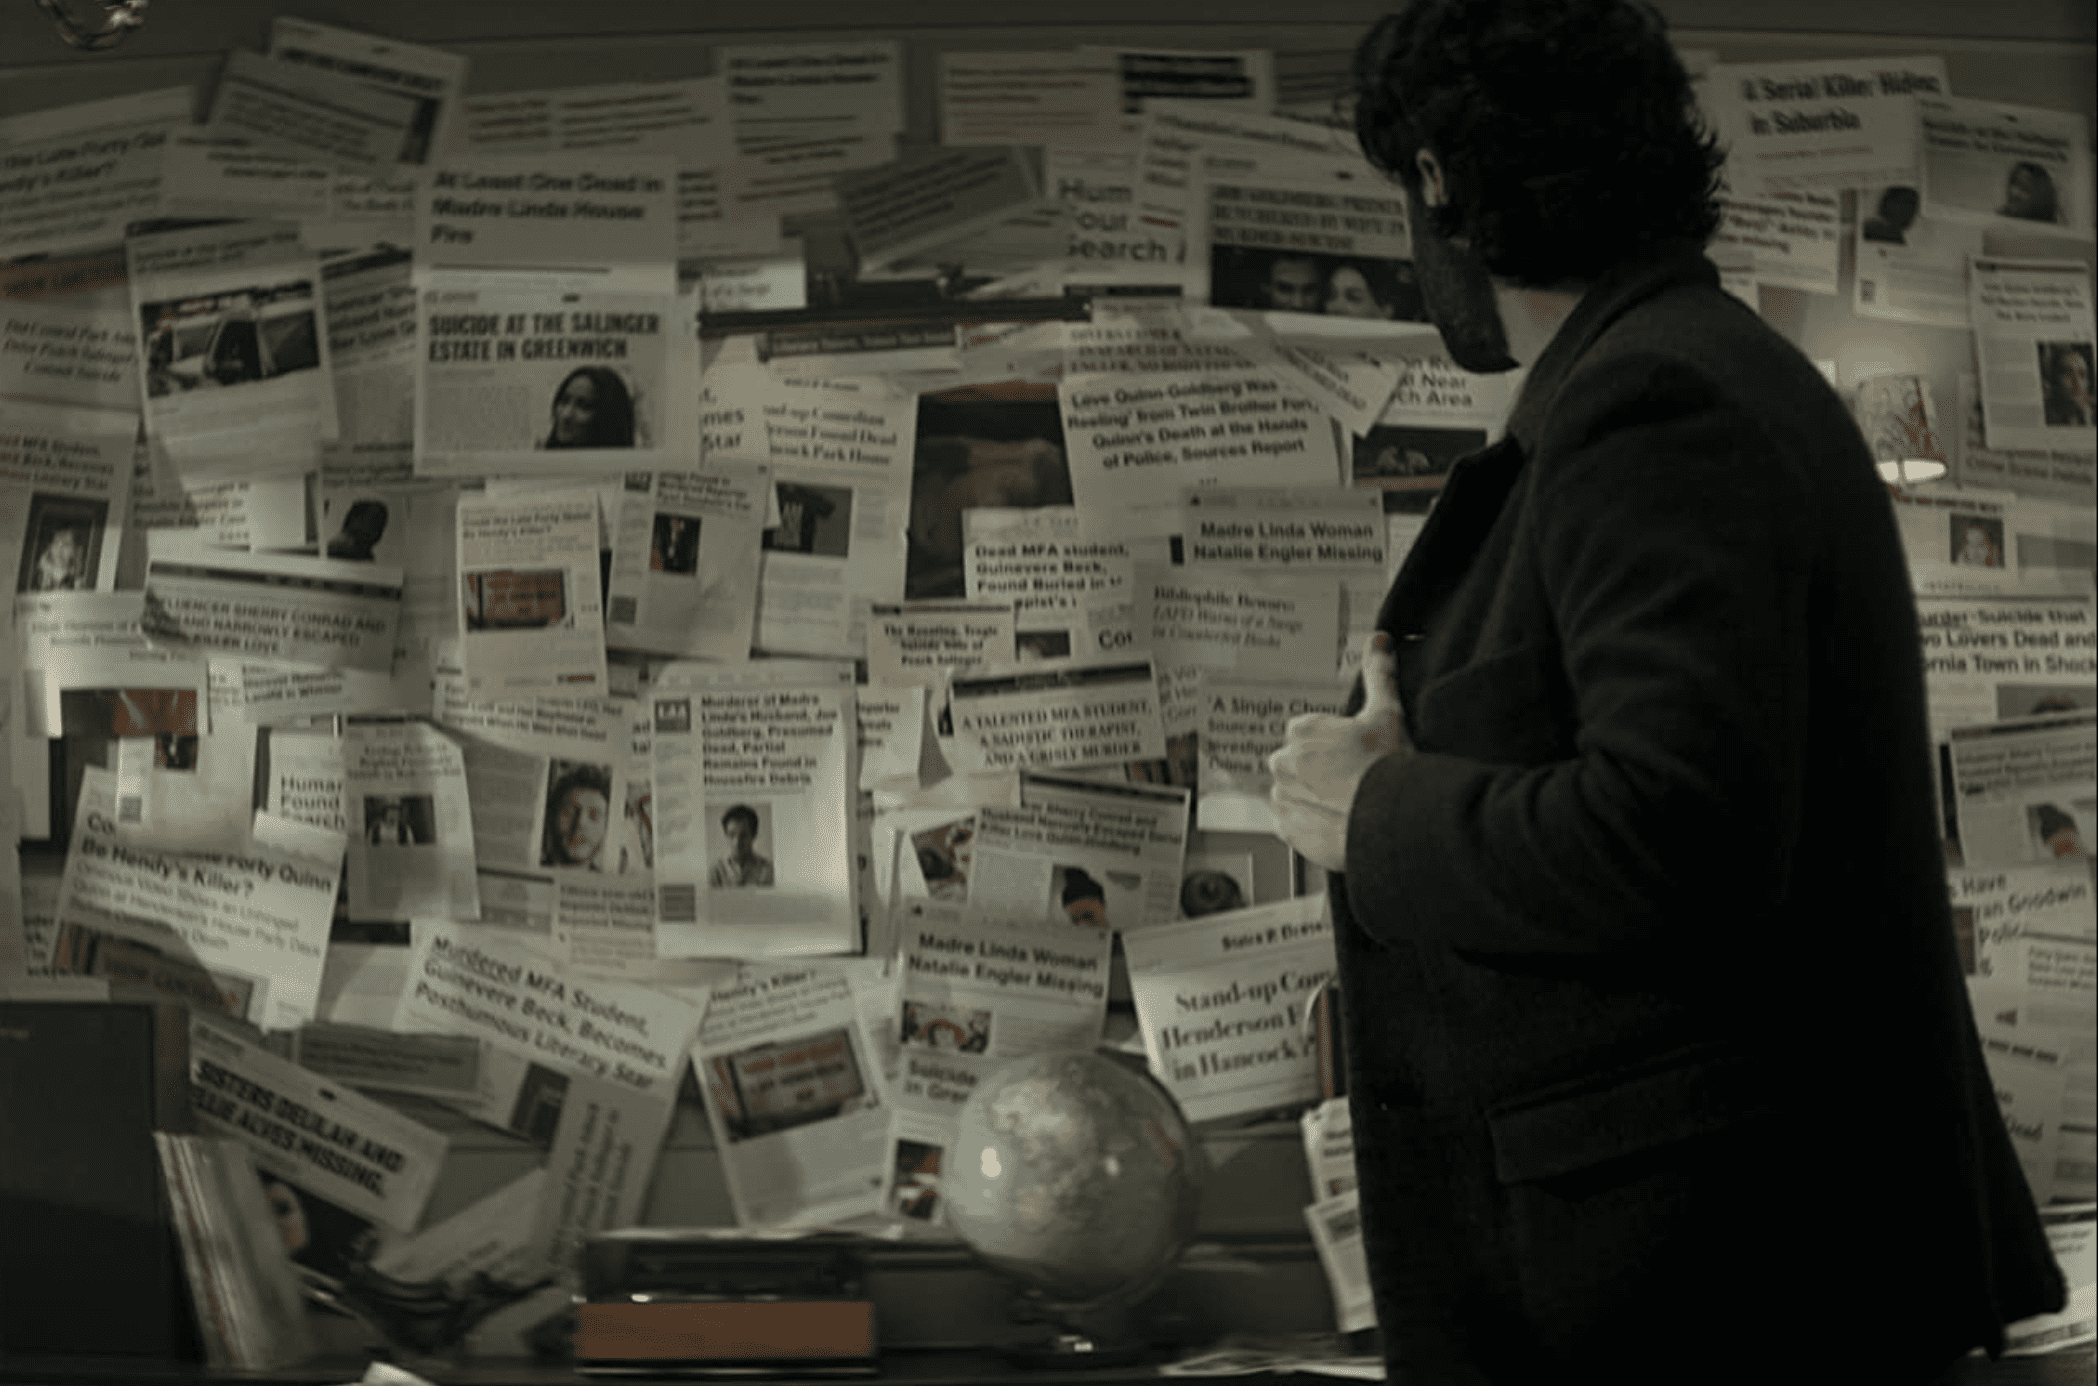 Joe stares at a board covered in newspaper clippings